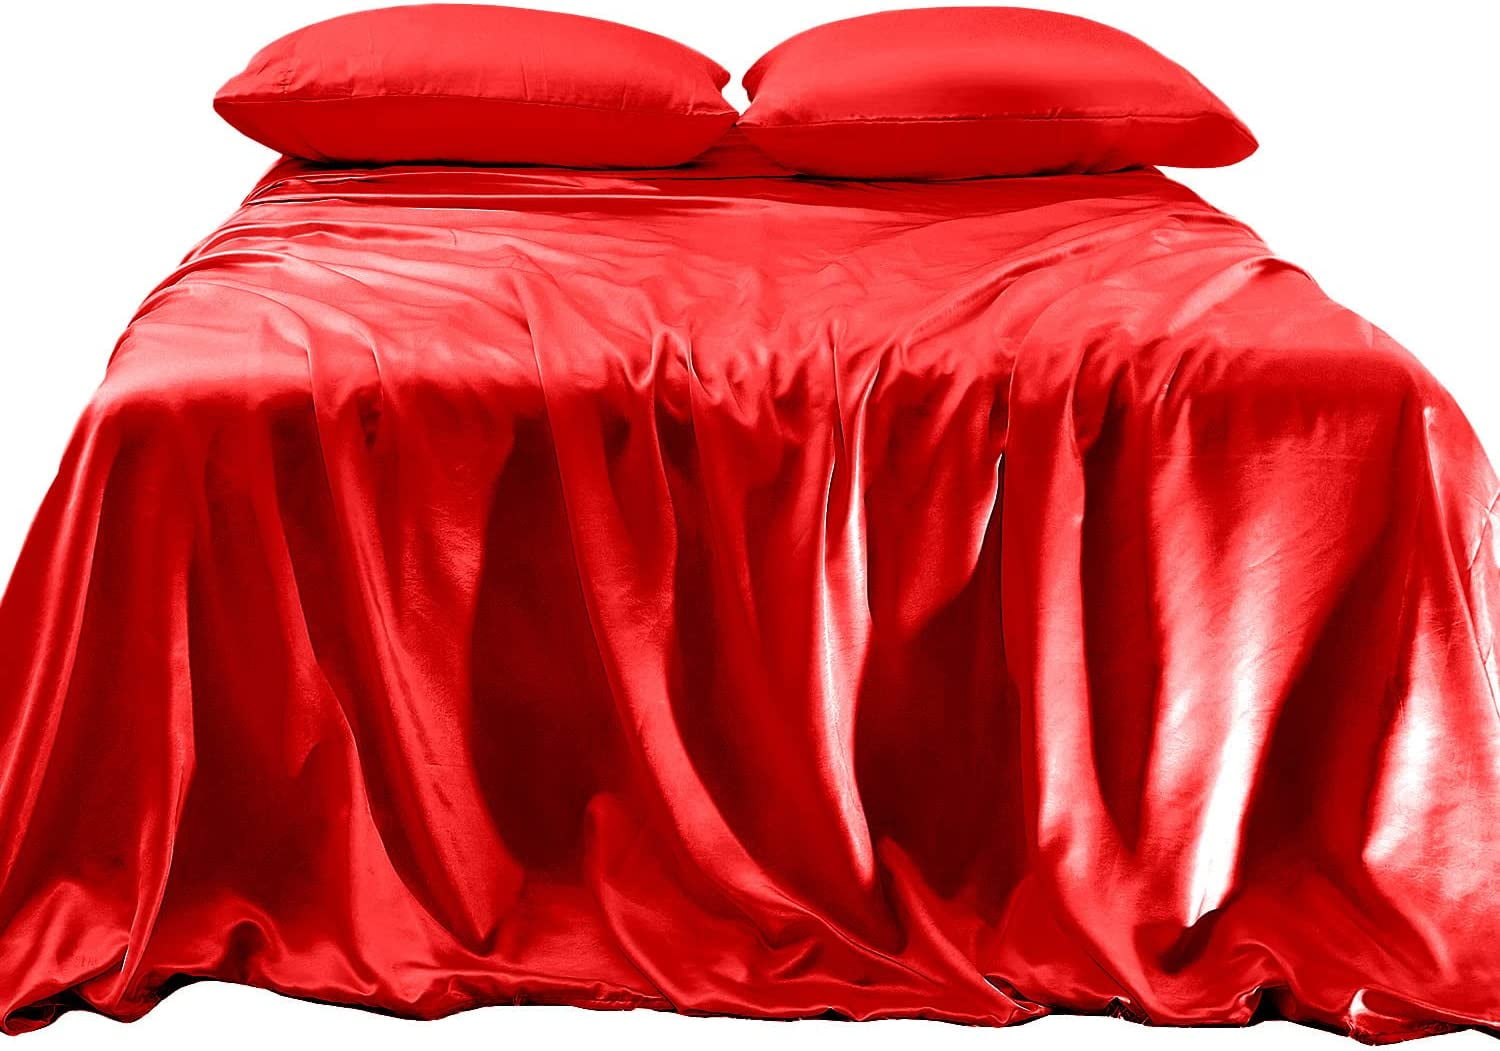 Up To 77% Off on Ultra Soft Silky Satin Bed Sh